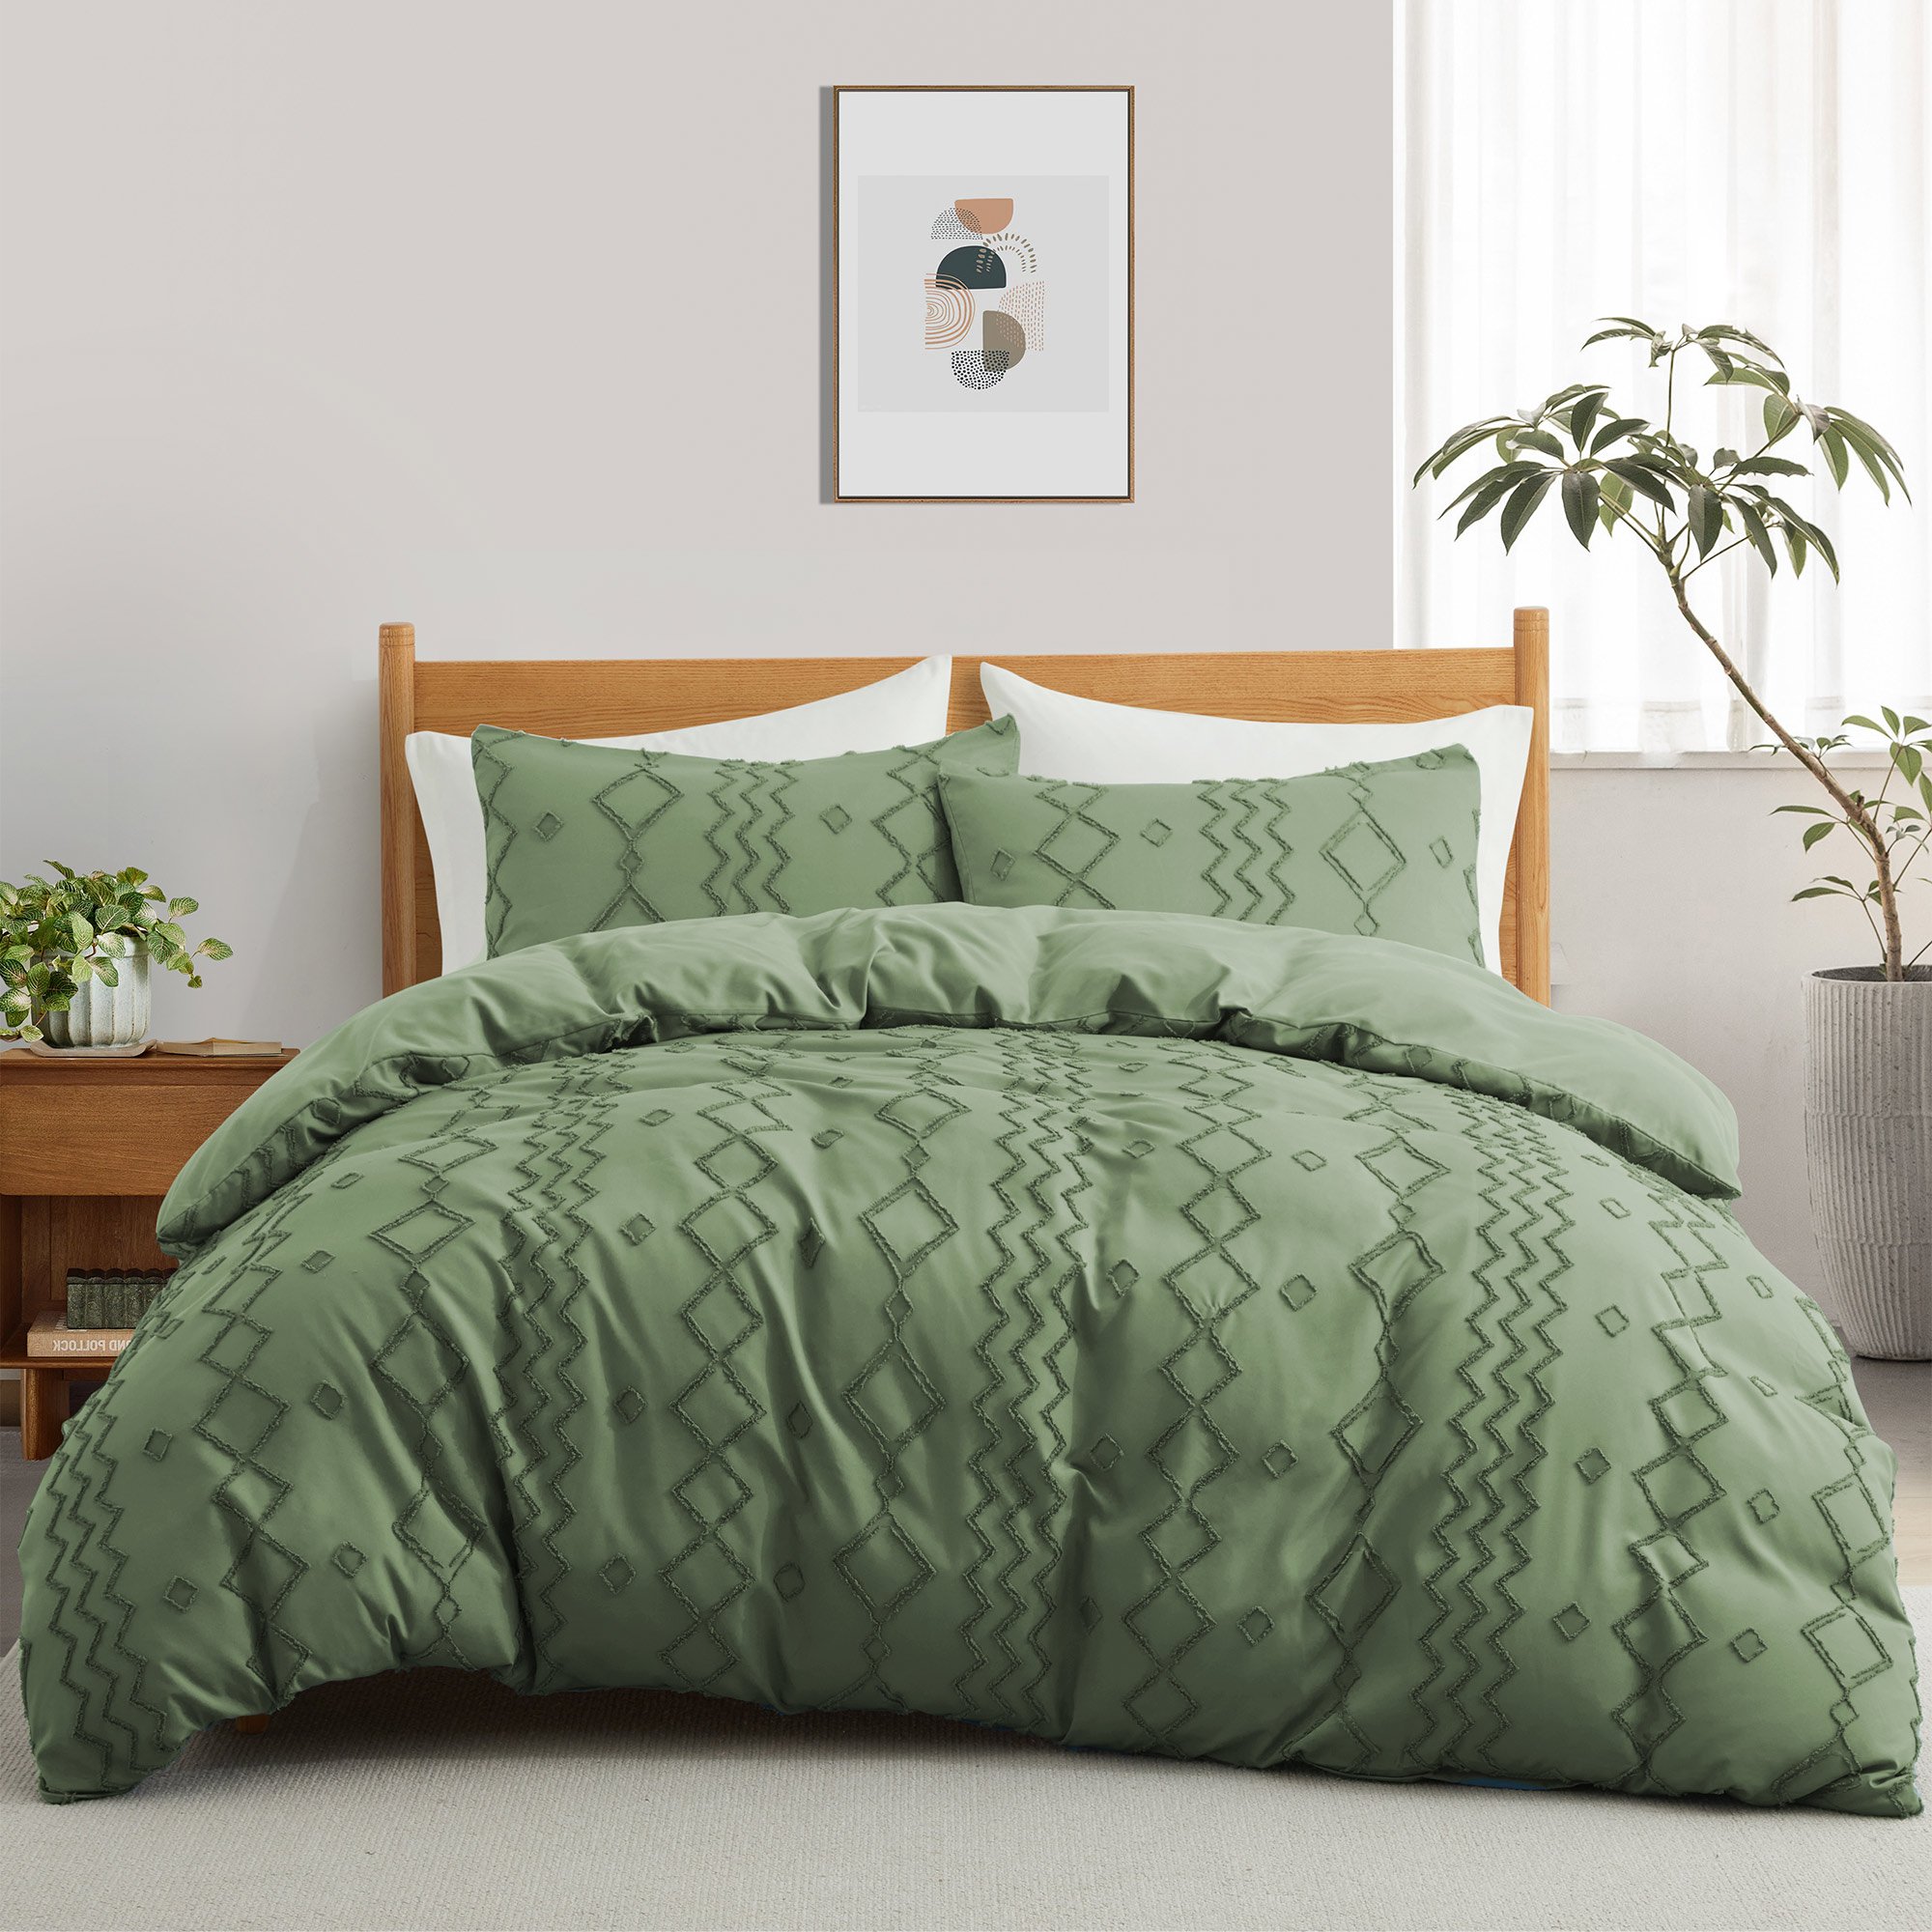 Basic Bedding Sets With All Season Goose Down Feather Comforter, 2 Pack Goose Down Pillows, Duvet Cover Set - Green Bundles Option, King Siz